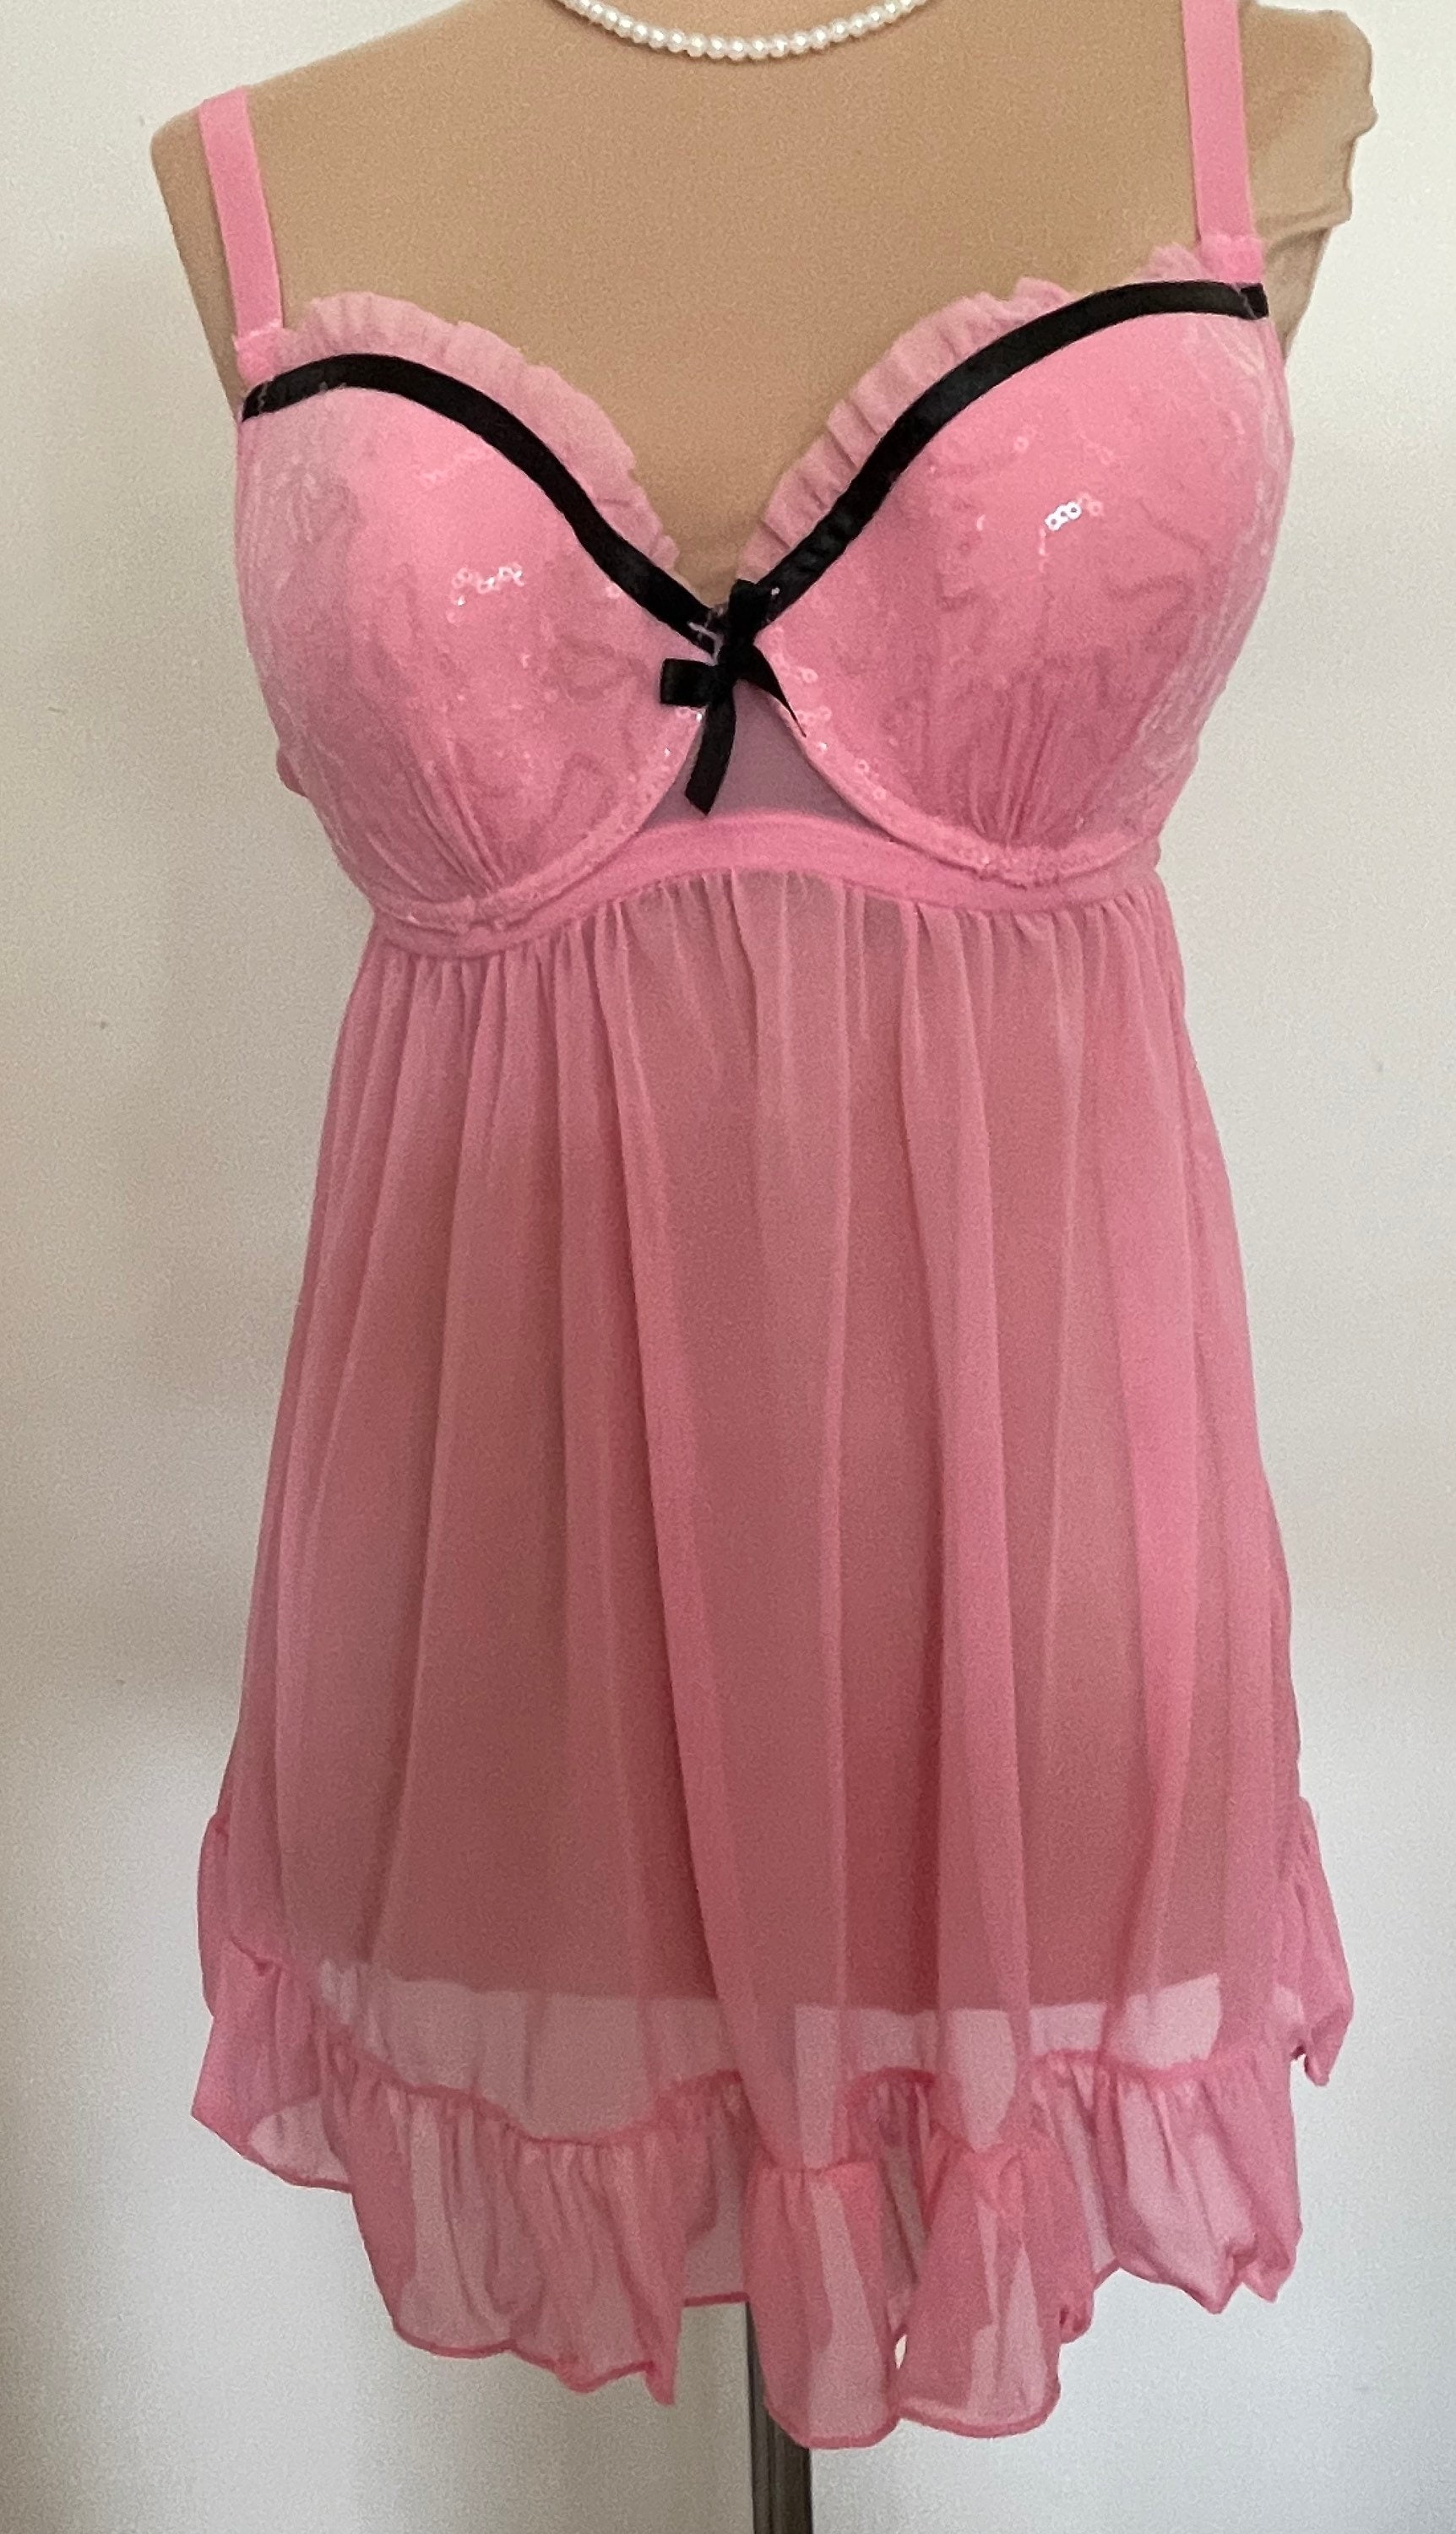 Sweet Hot Pink Babydoll Push-up Lingerie Top by Passion Sexy and Sweet in  XL Large Plus Size 